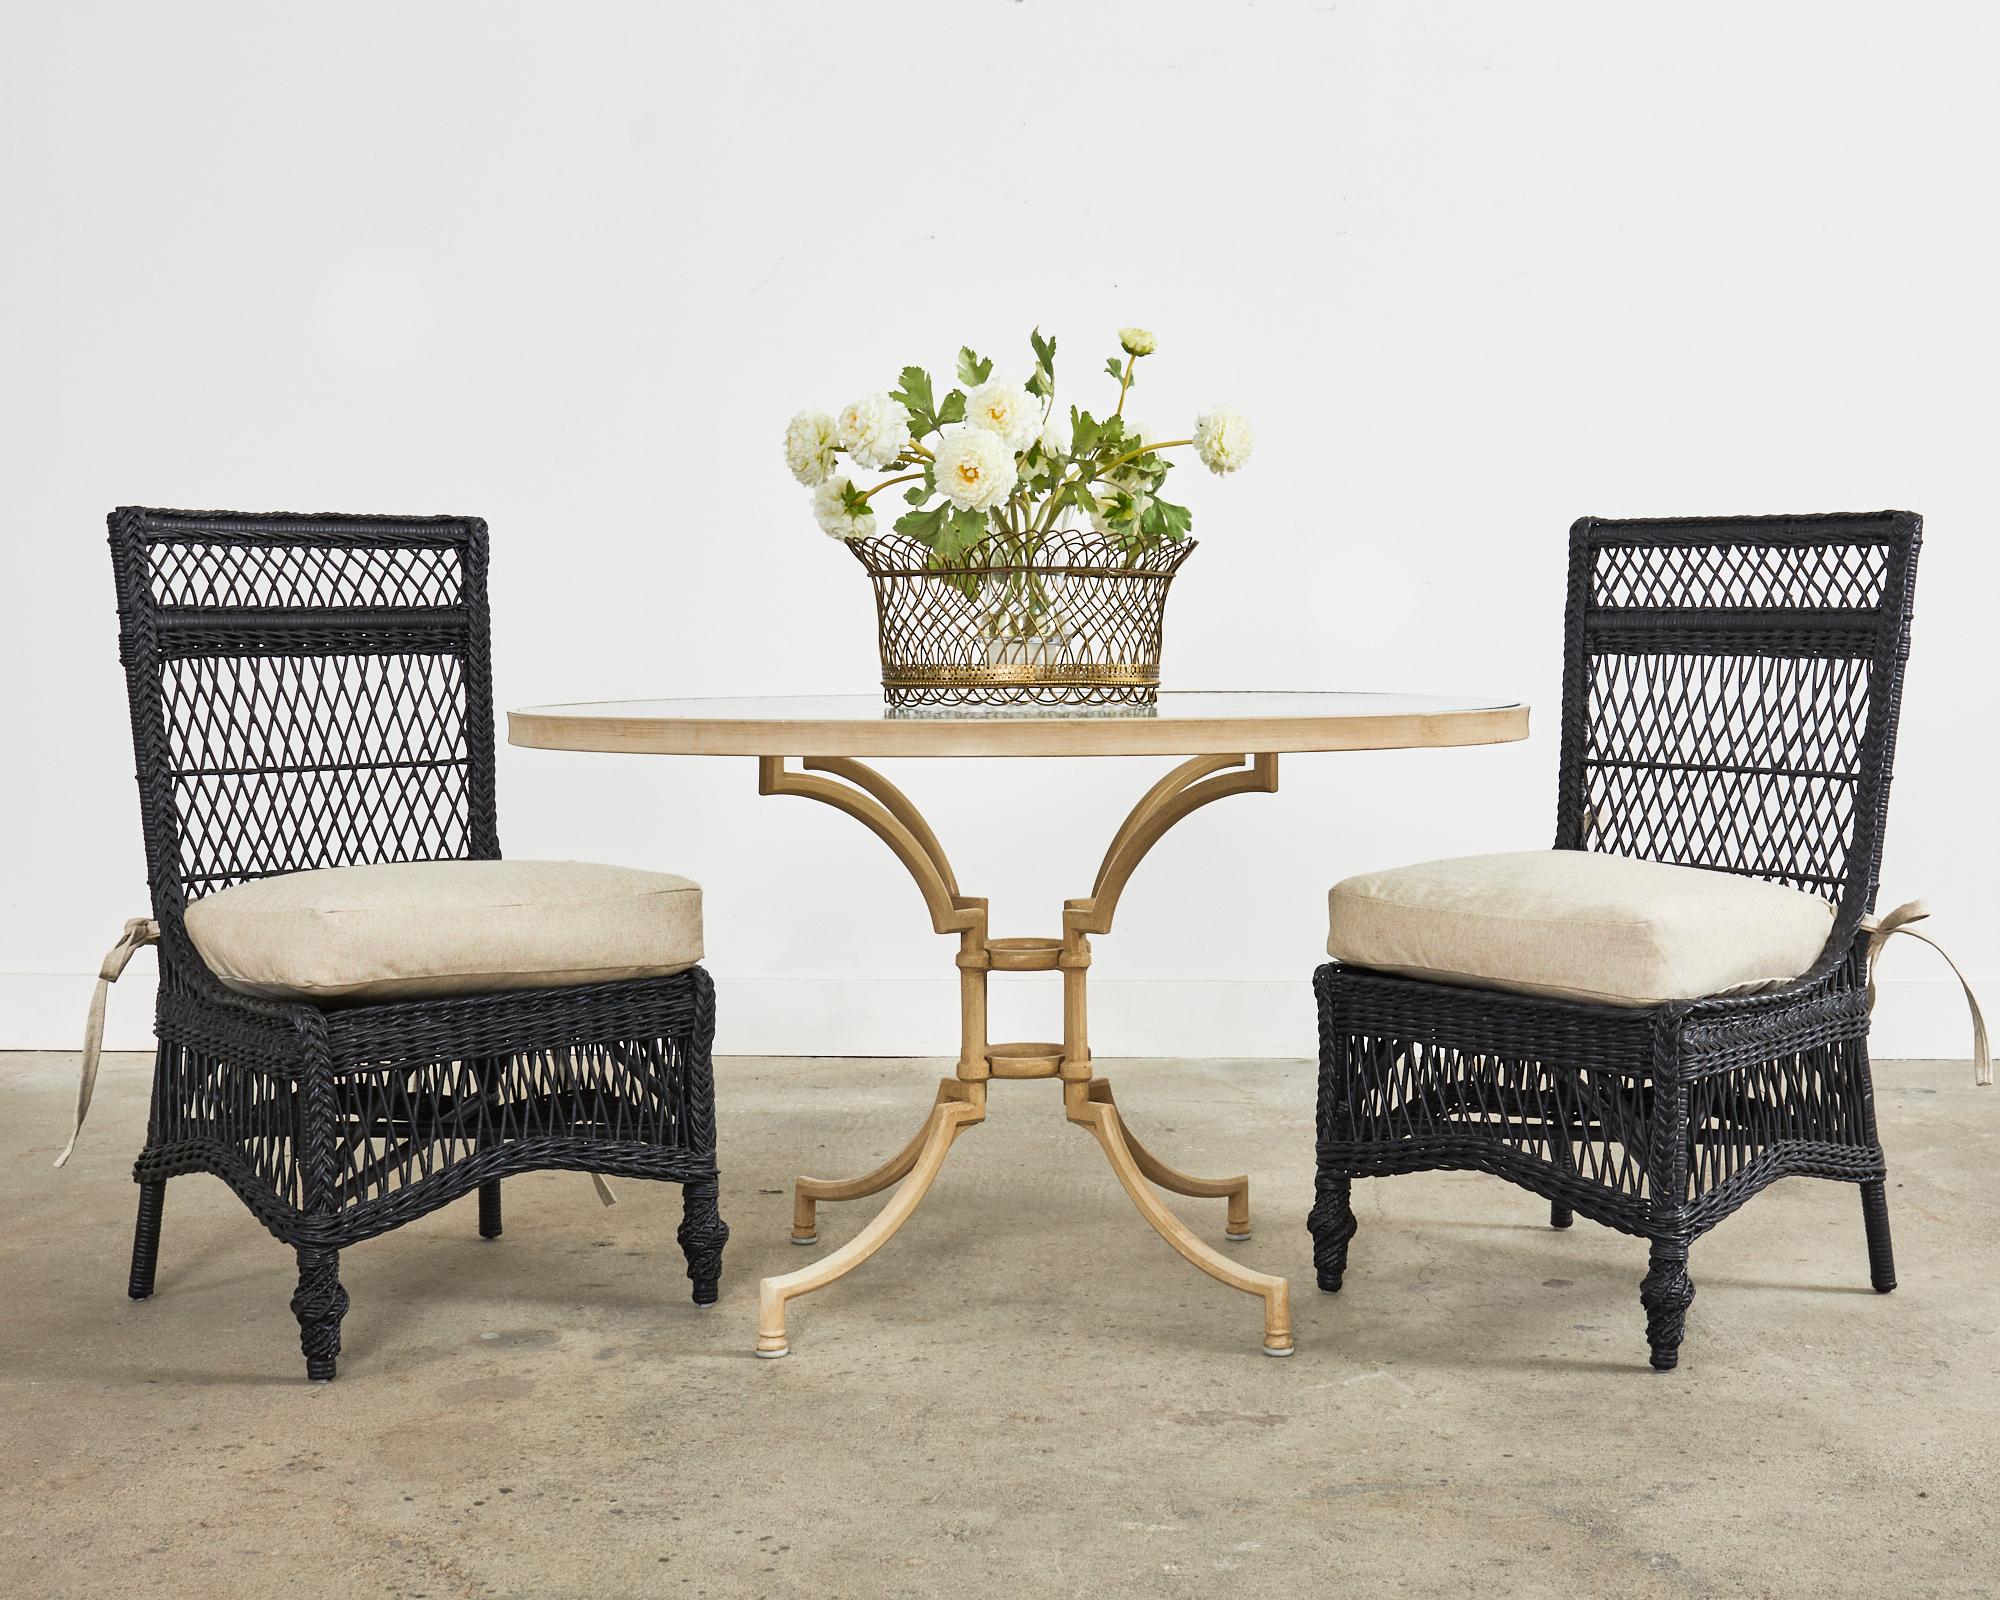 Gorgeous set of eight painted garden chairs or dining chairs made in the manner and style of Cyrus Wakefield Bar Harbor. The chairs are constructed from sturdy rattan frames with an open fretwork design of wicker. The chairs feature a tall square